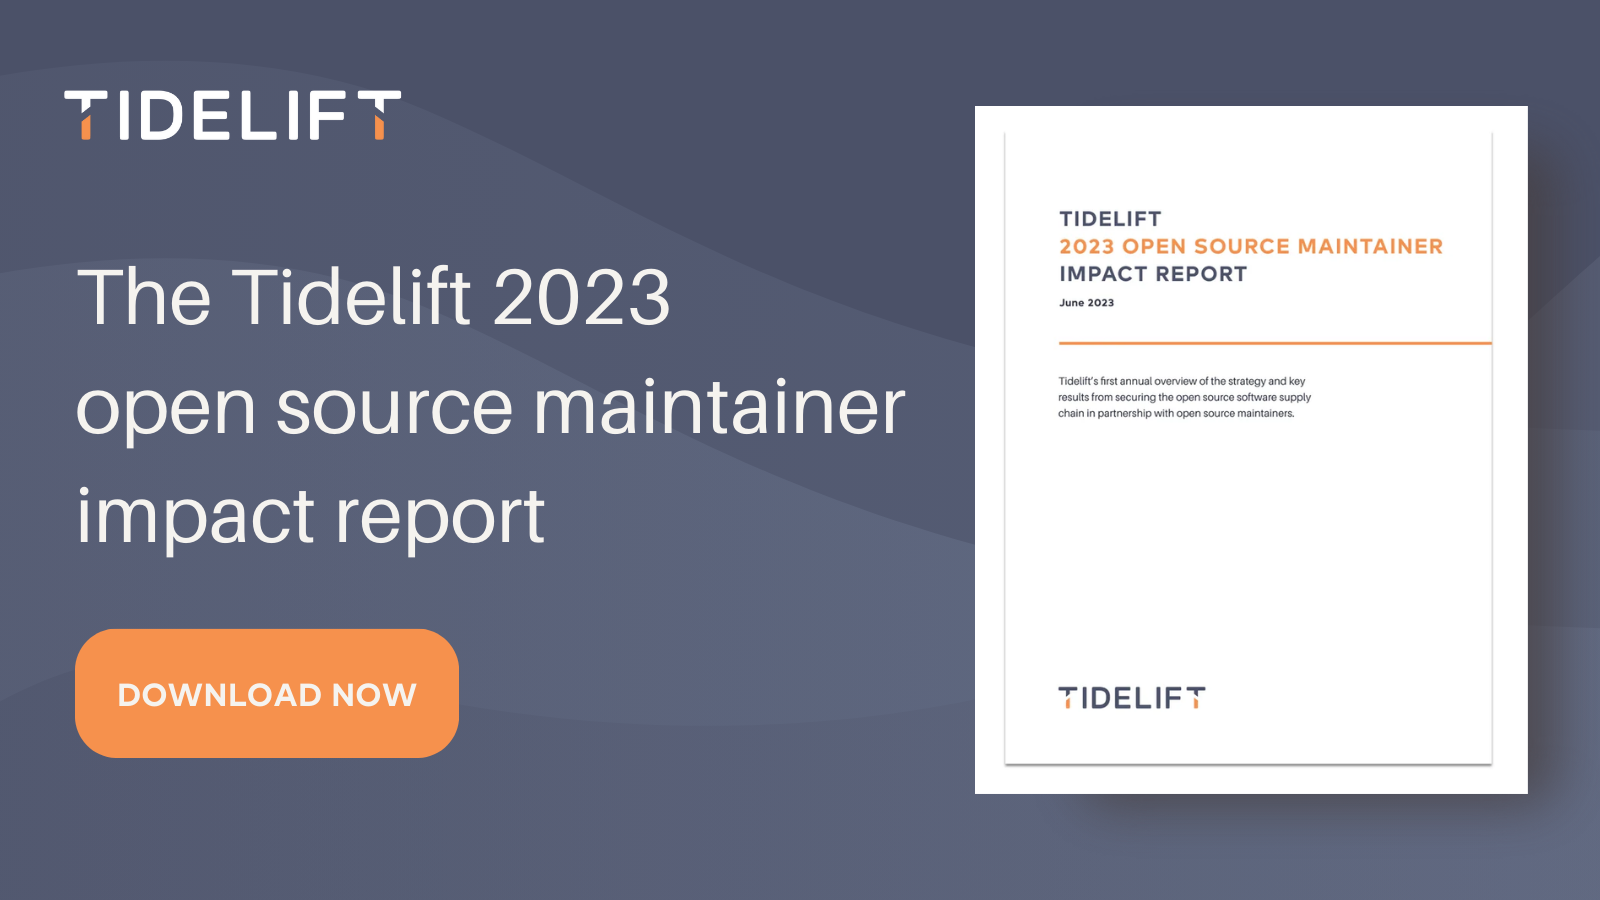 The Tidelift 2023 open source maintainer impact report